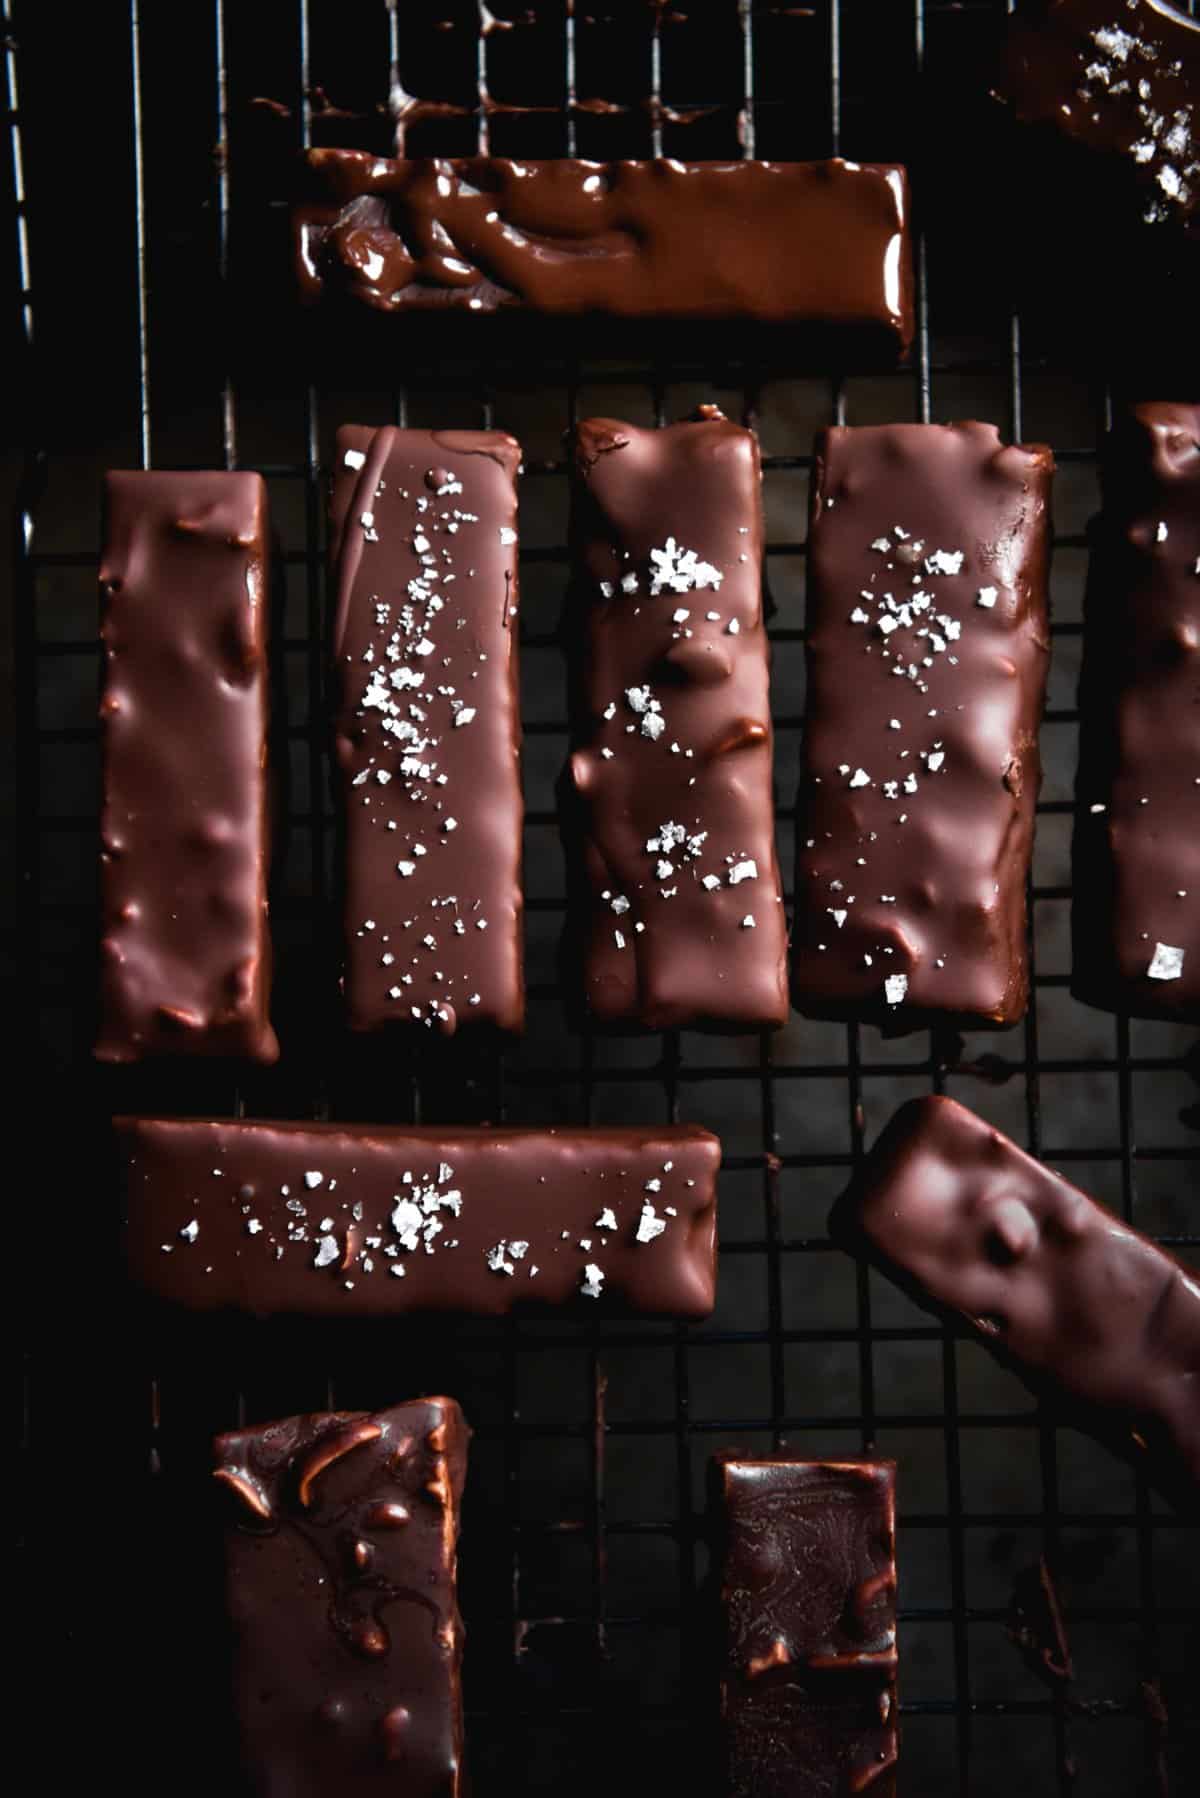 A moody, aerial image of chewy peanut butter bars with sea salt and a dark chocolate coating. The bars sit atop a cooling rack as the chocolate drips off them onto the black background below.